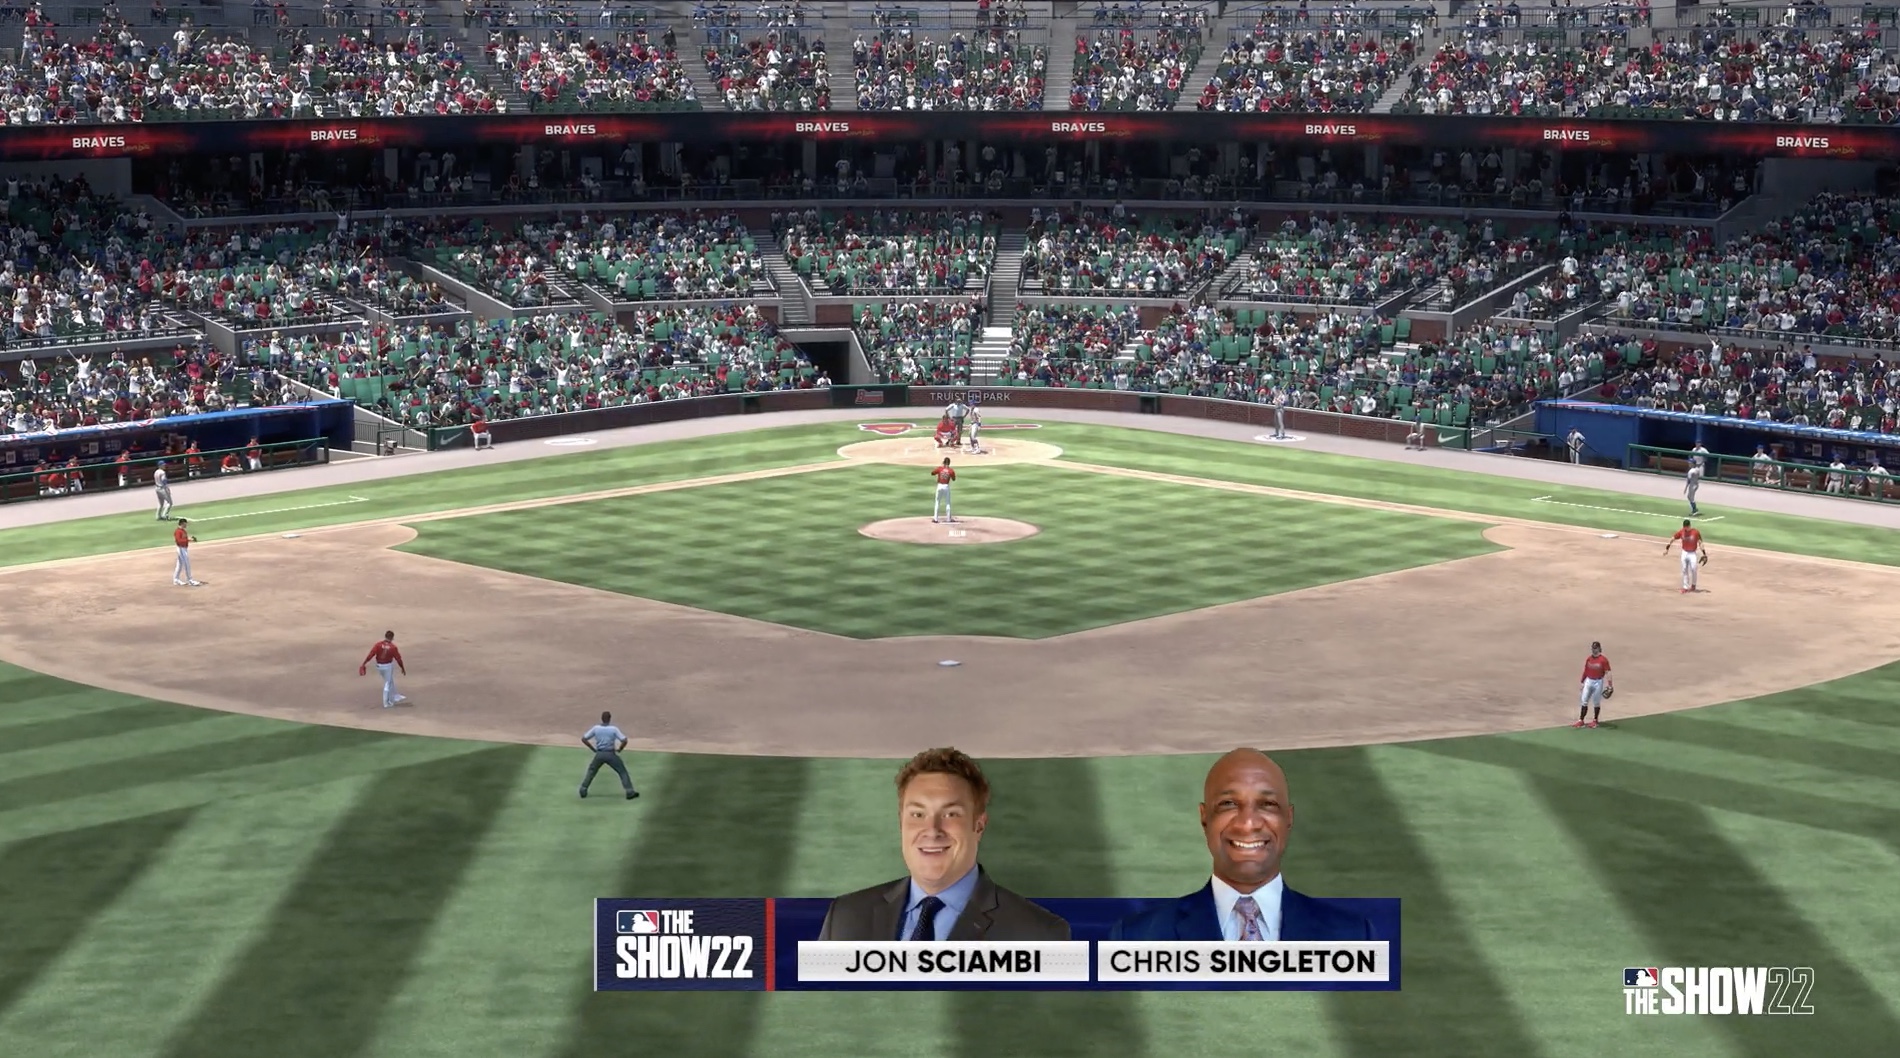 MLB® The Show™ - MLB® The Show™ 23 is flying high with the